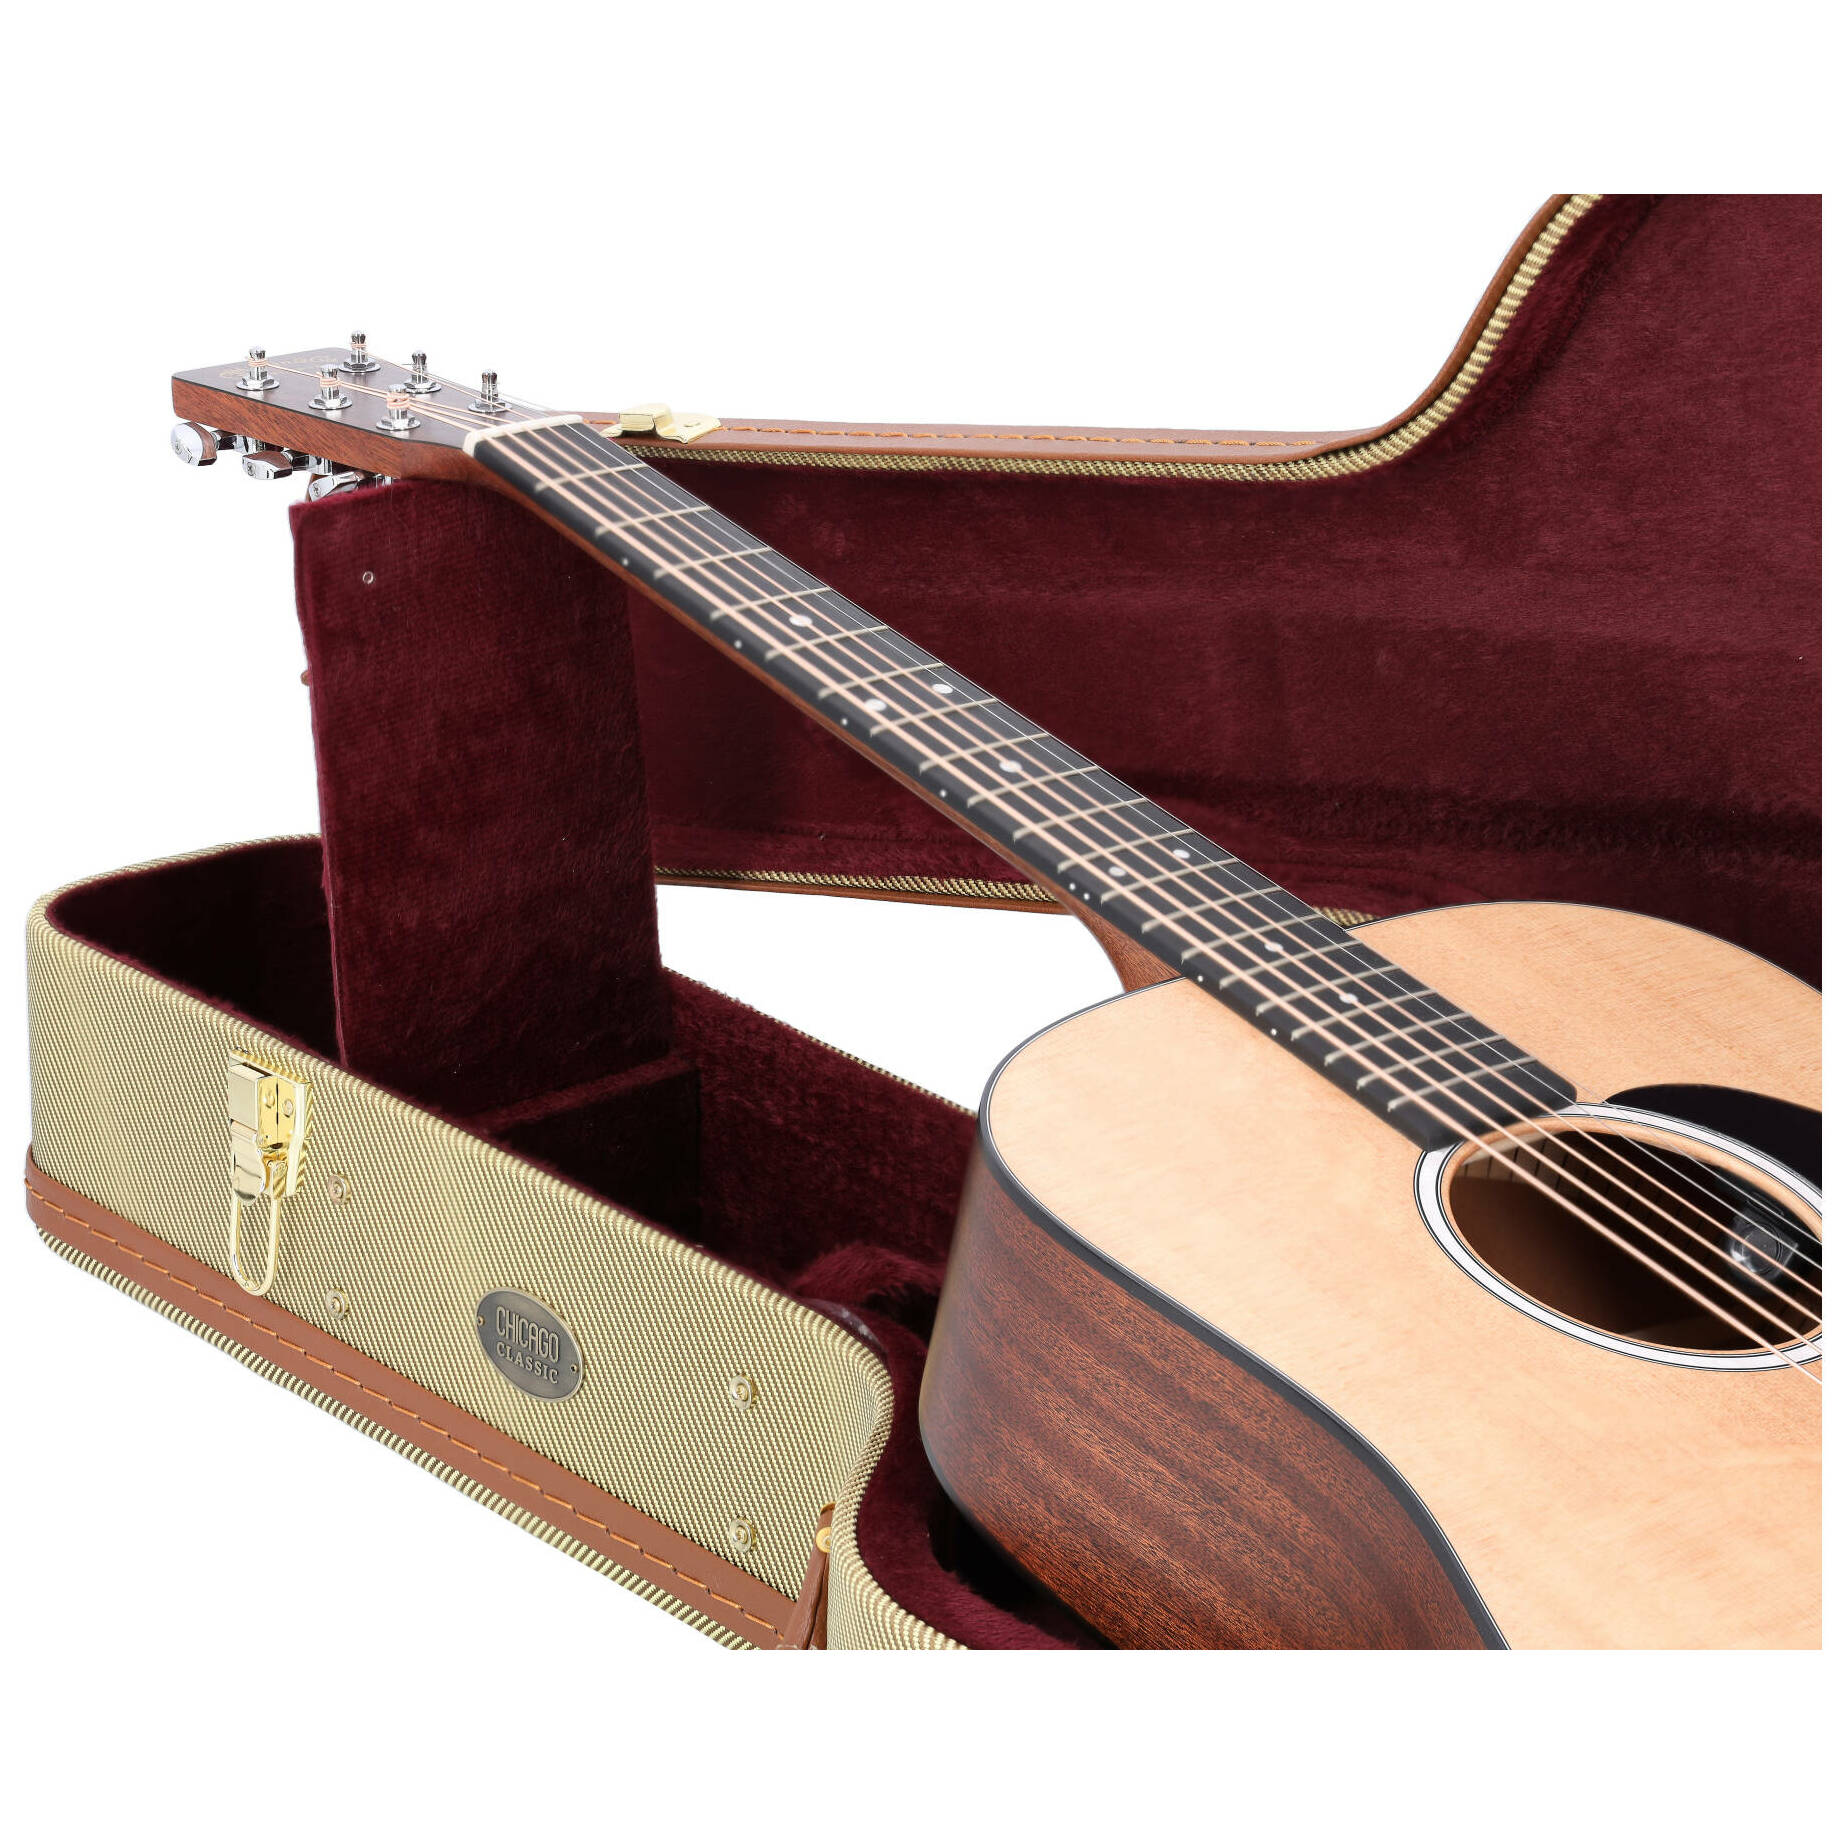 Chicago Classic Holzkoffer Dreadnought Tweed 9